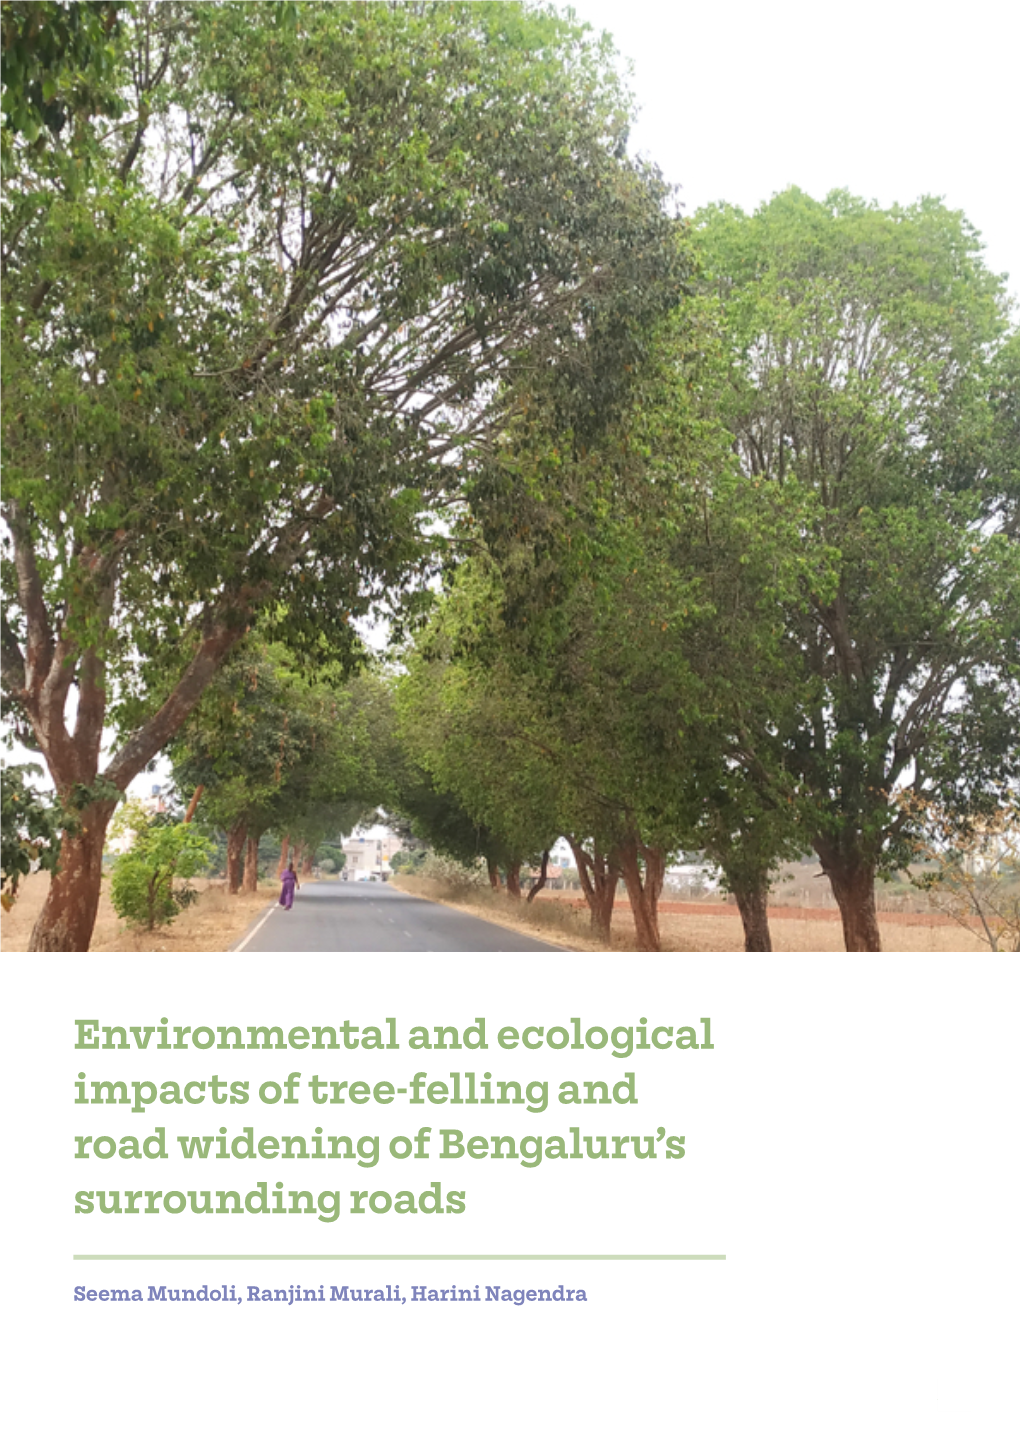 Environmental and Ecological Impacts of Tree-Felling and Road Widening of Bengaluru’S Surrounding Roads